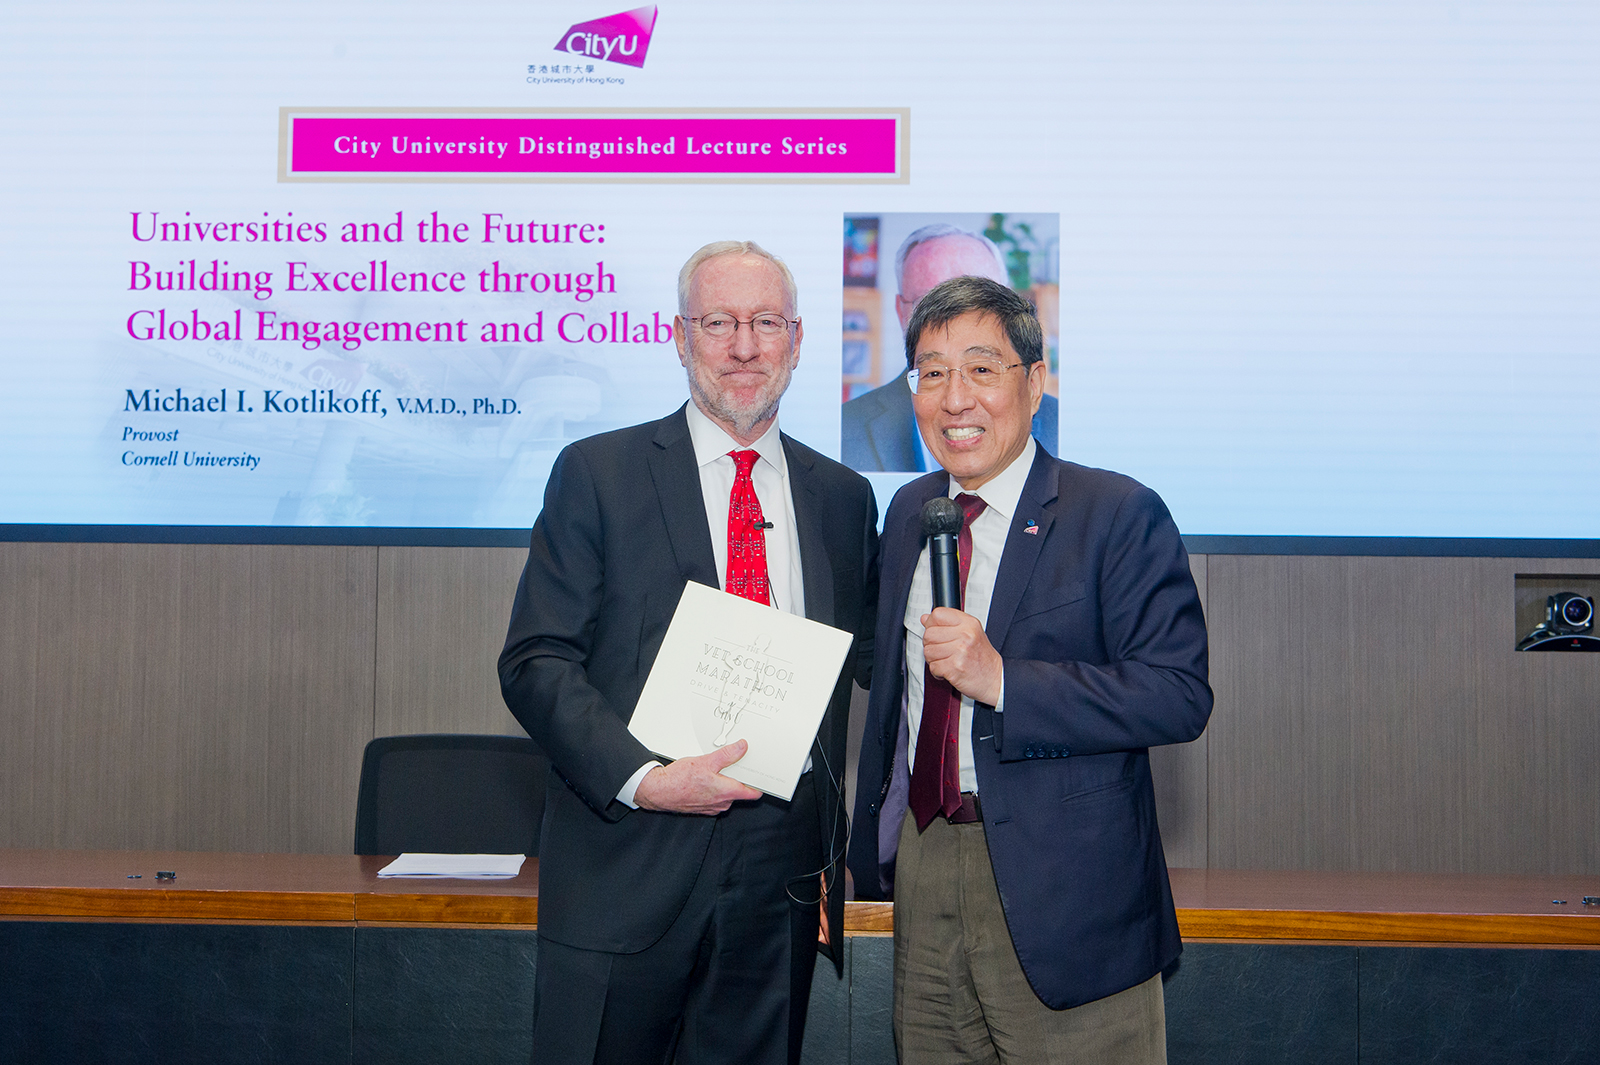 President Kuo (right) presents Professor Kotlikoff with a copy of the recently published book, The Vet School Marathon: Drive and Tenacity at CityU.  President Kuo presents Professor Kotlikoff with a copy of the recently published book, The Vet School Marathon: Drive and Tenacity at CityU.